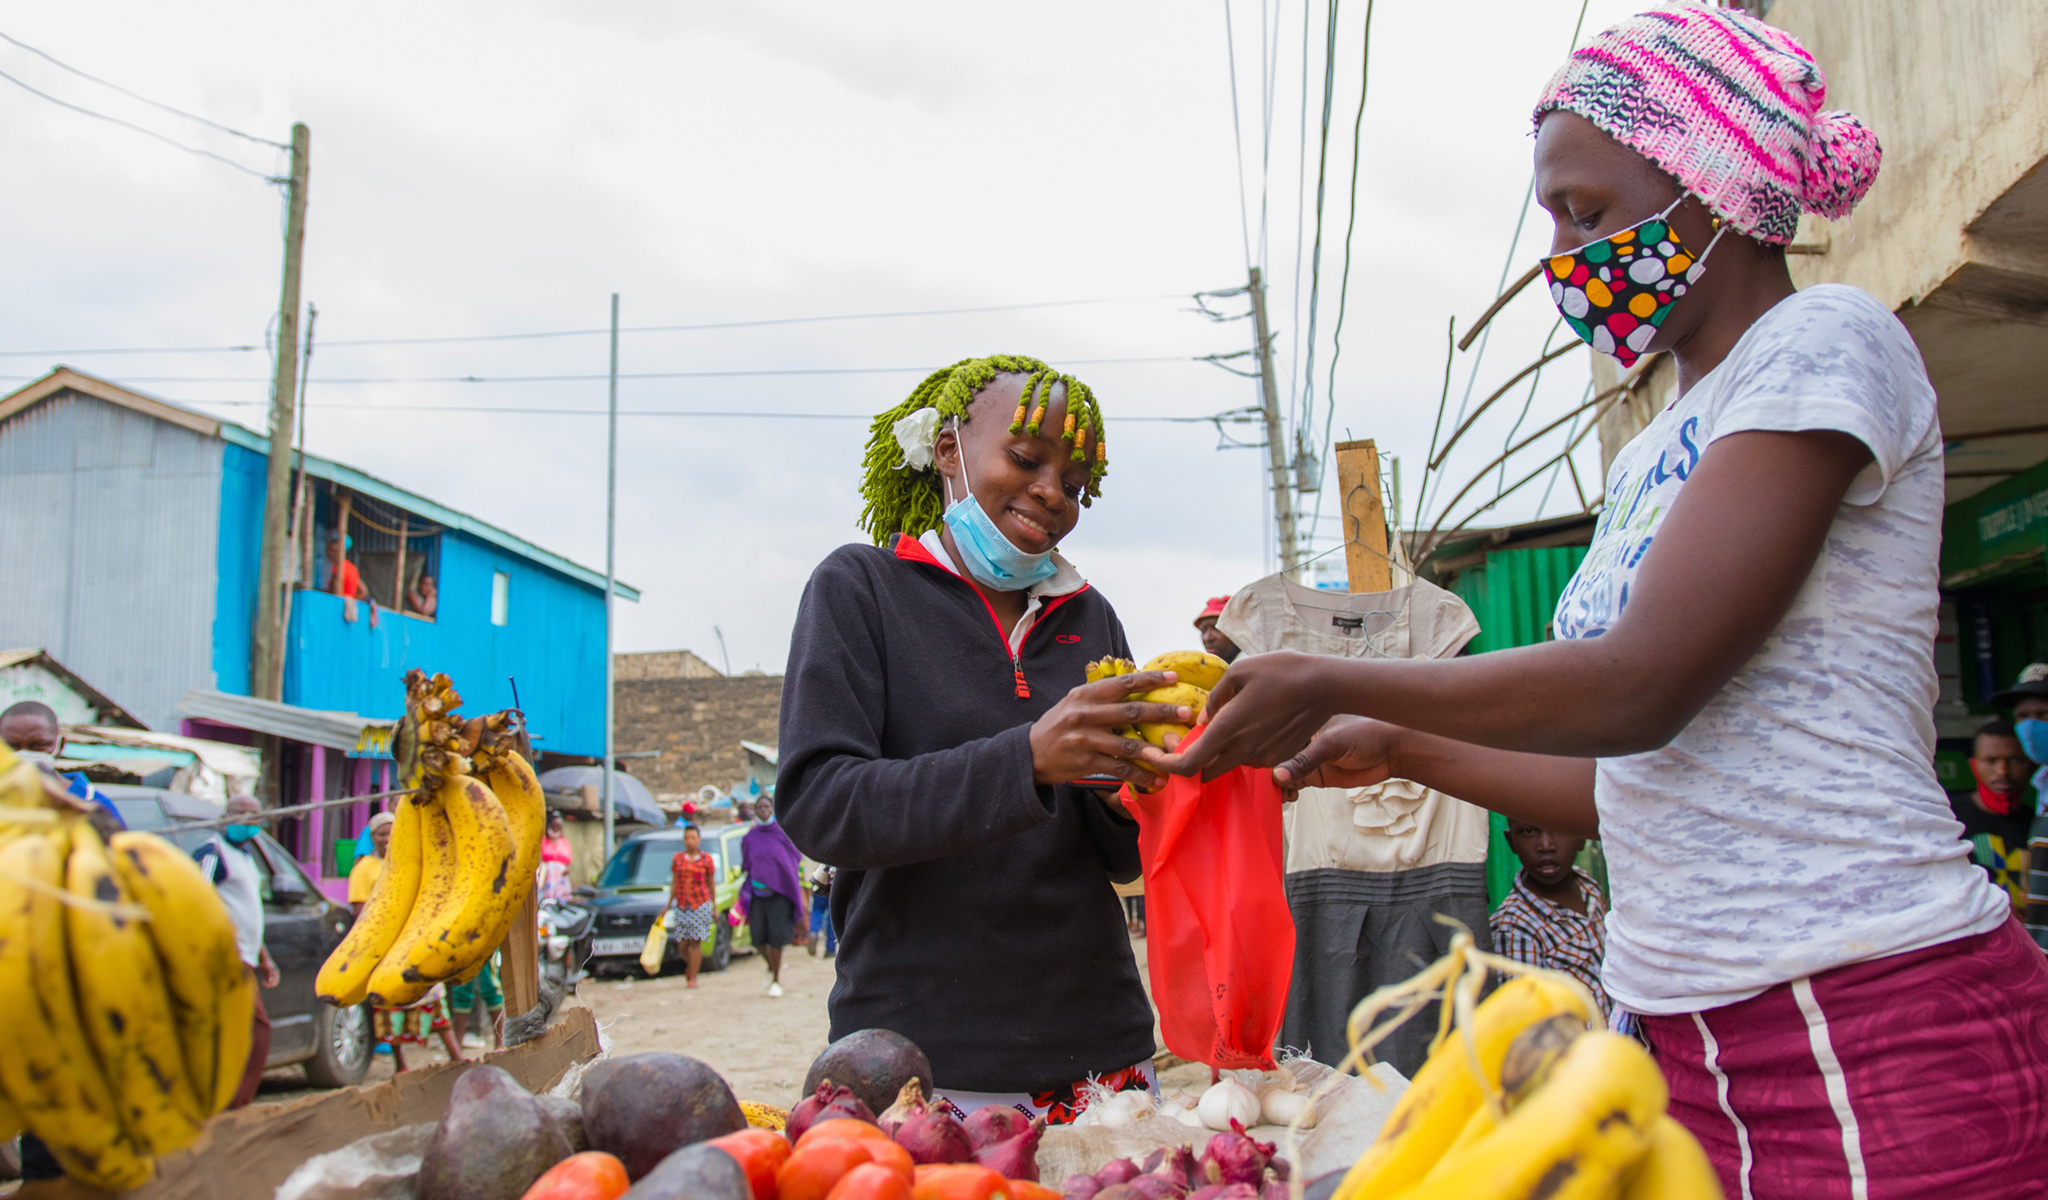 Photo of "Cash Transfer Beneficiary" Ann Mueni, 20, purchasing fruits and vegetables for her household using the Kes 4000 received through mobile money transfer.